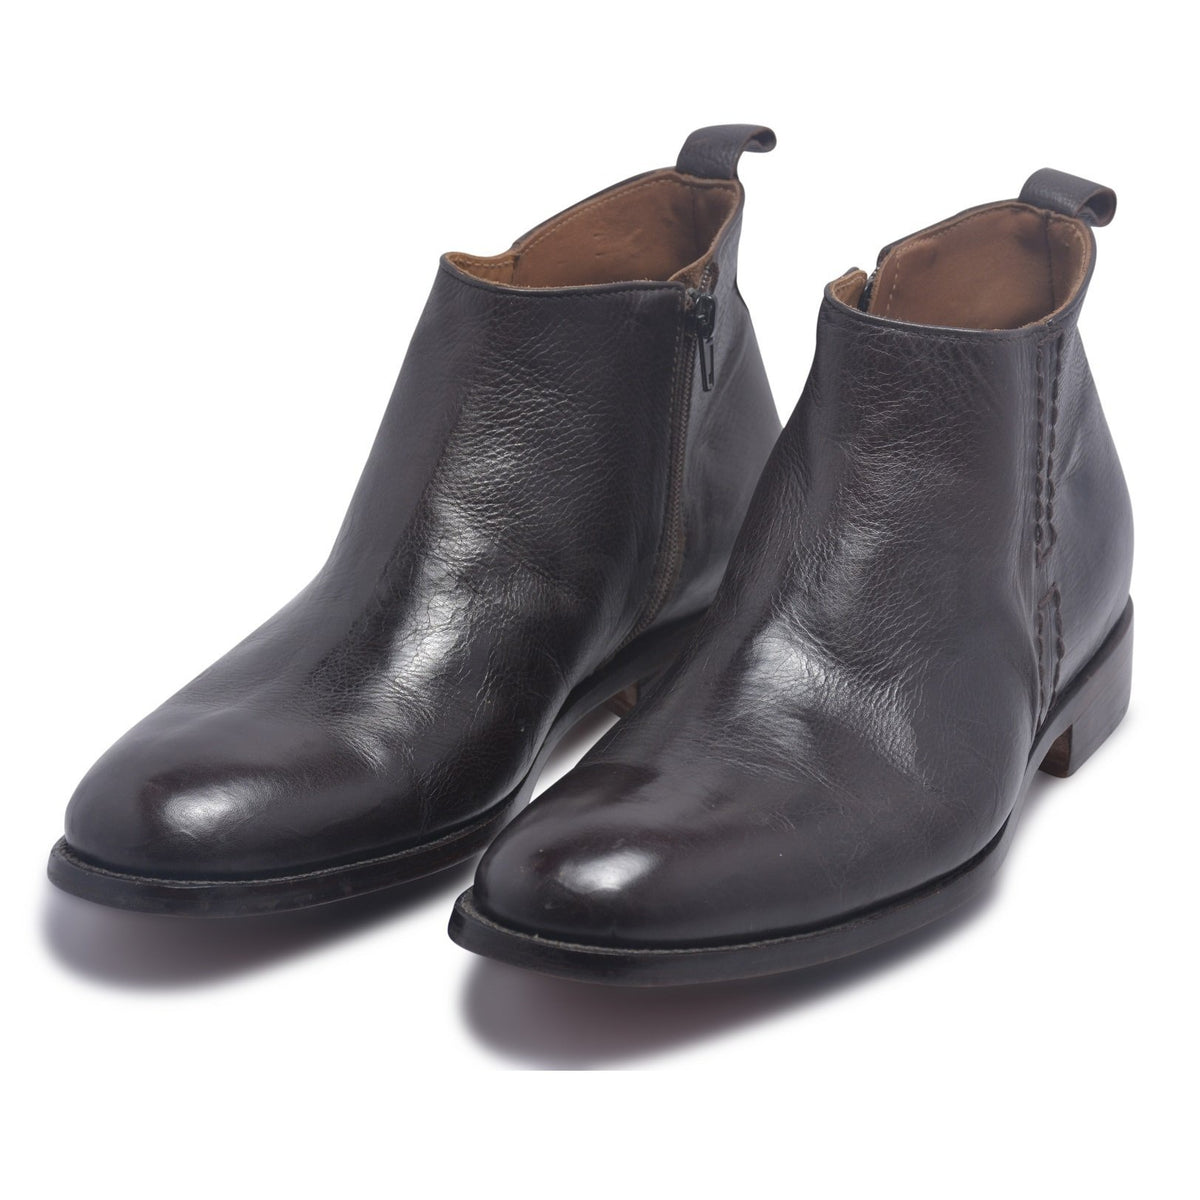 Black Leather Formal Ankle Zipped Chelsea Boots